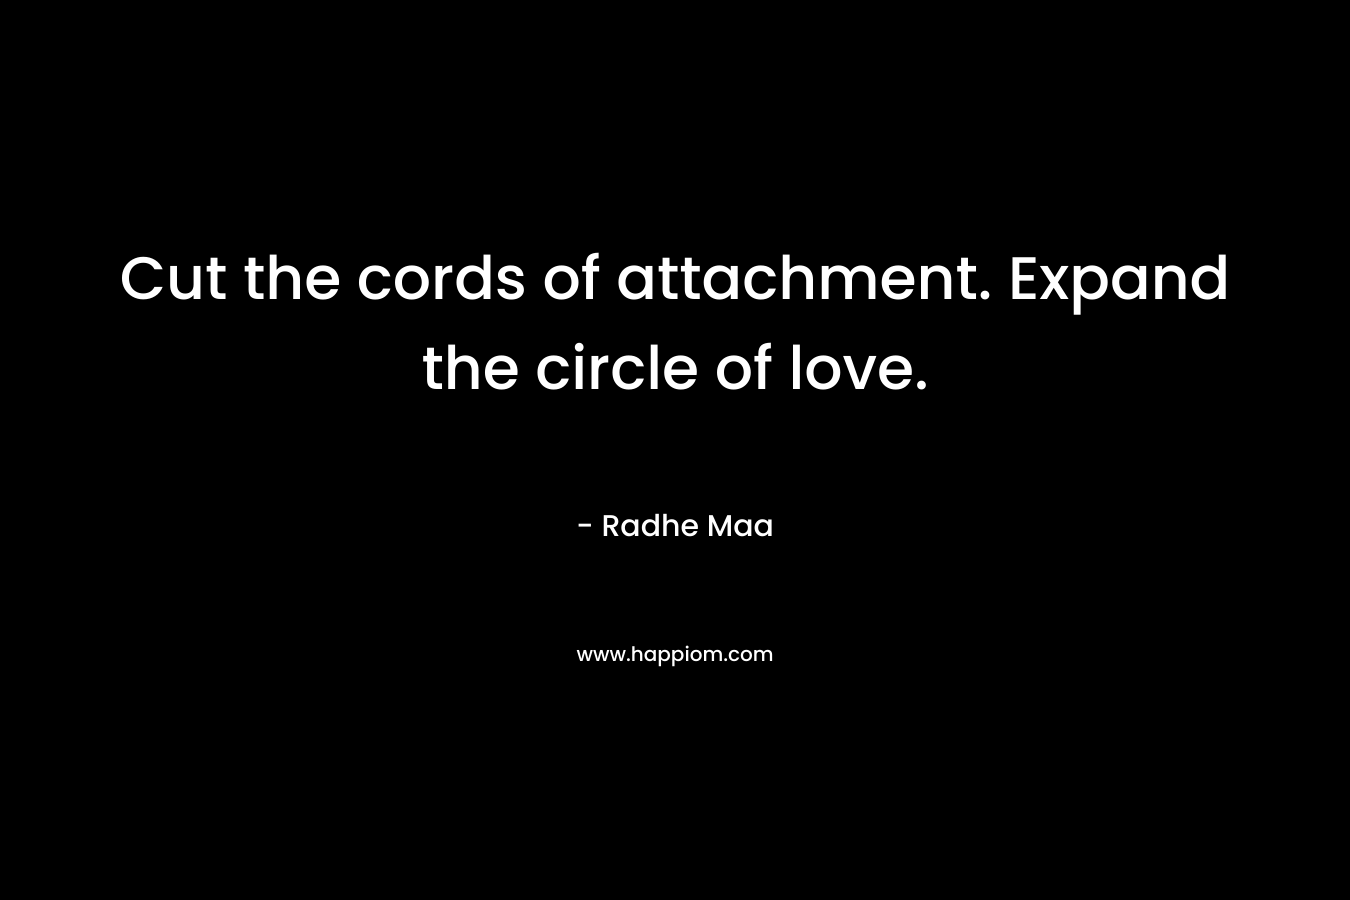 Cut the cords of attachment. Expand the circle of love.